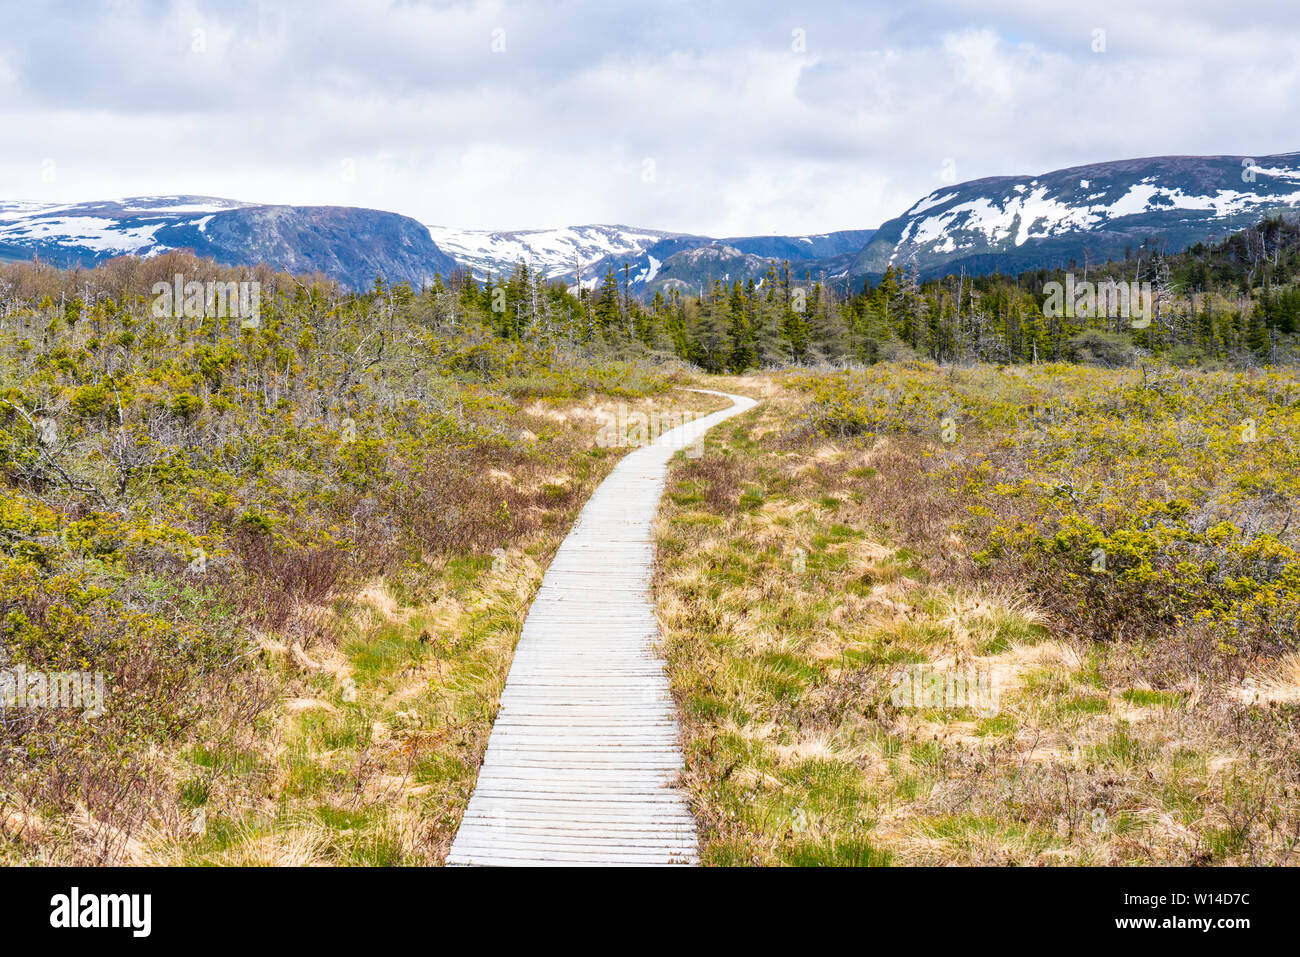 Trail in Gros Morne National Park in Newfoundland Canada Stock Photo